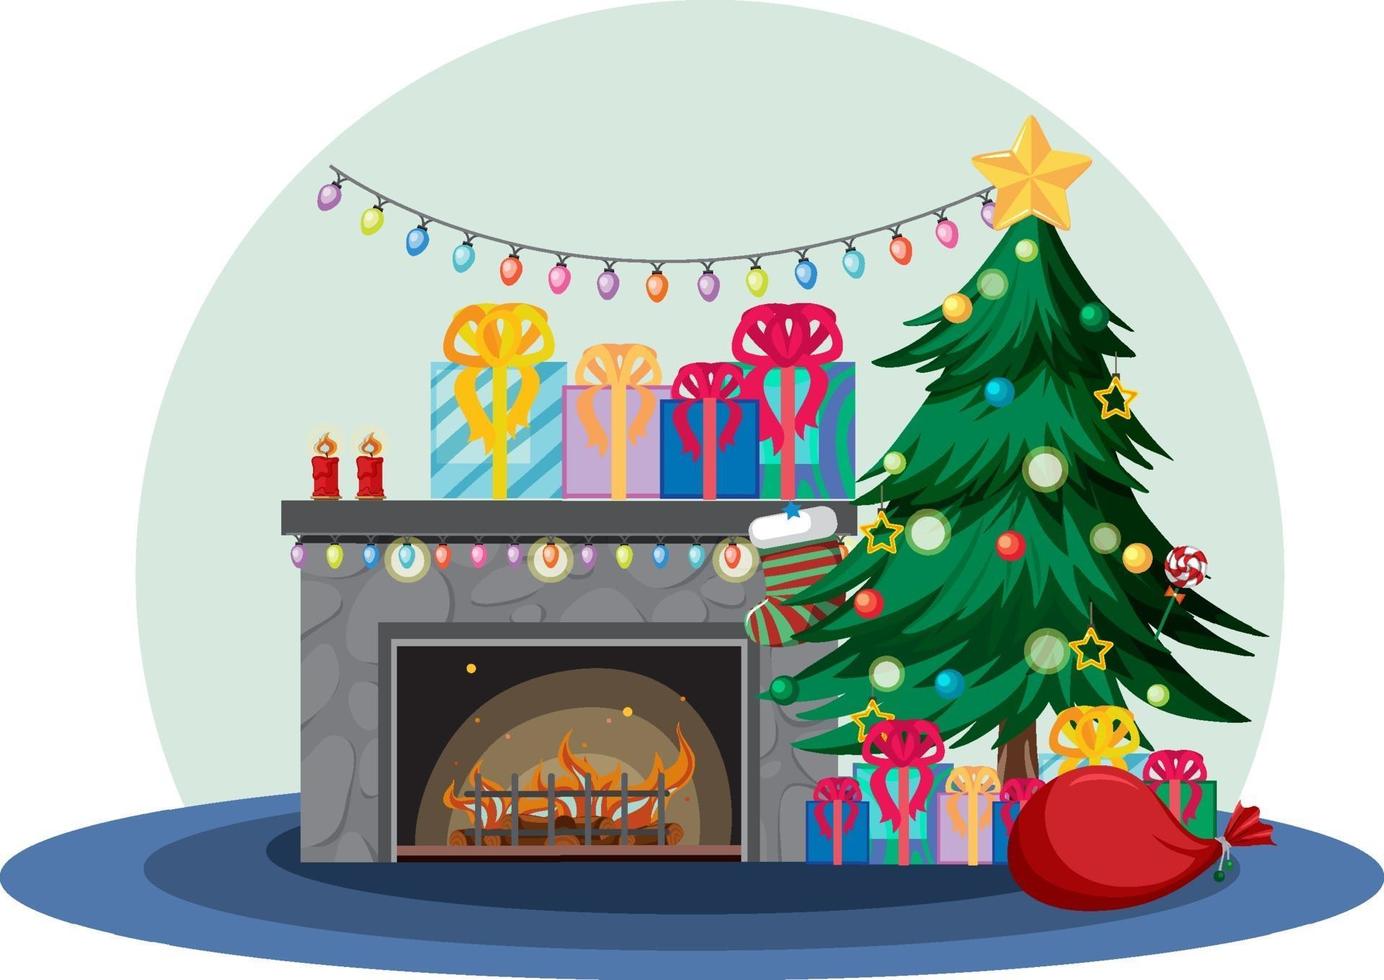 Fireplace with Christmas decorations vector